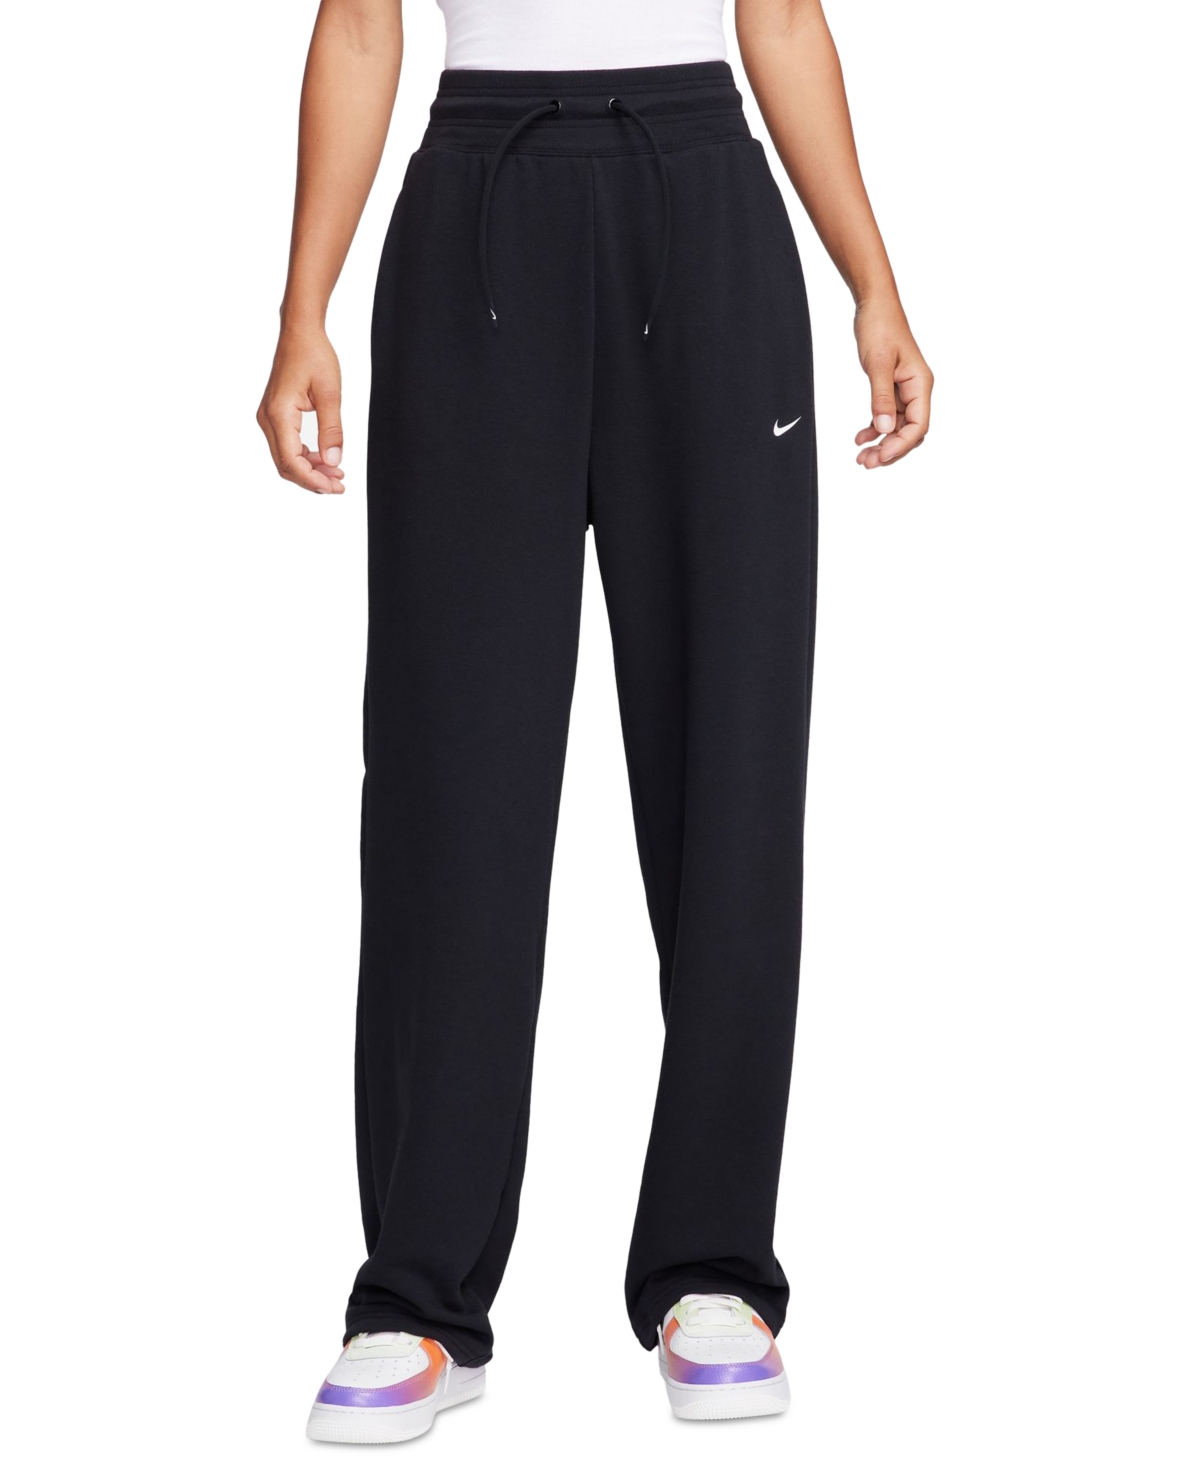 Women's Dri-fit One French Terry High-Waisted Open-Hem Sweatpants - Carbon Heather